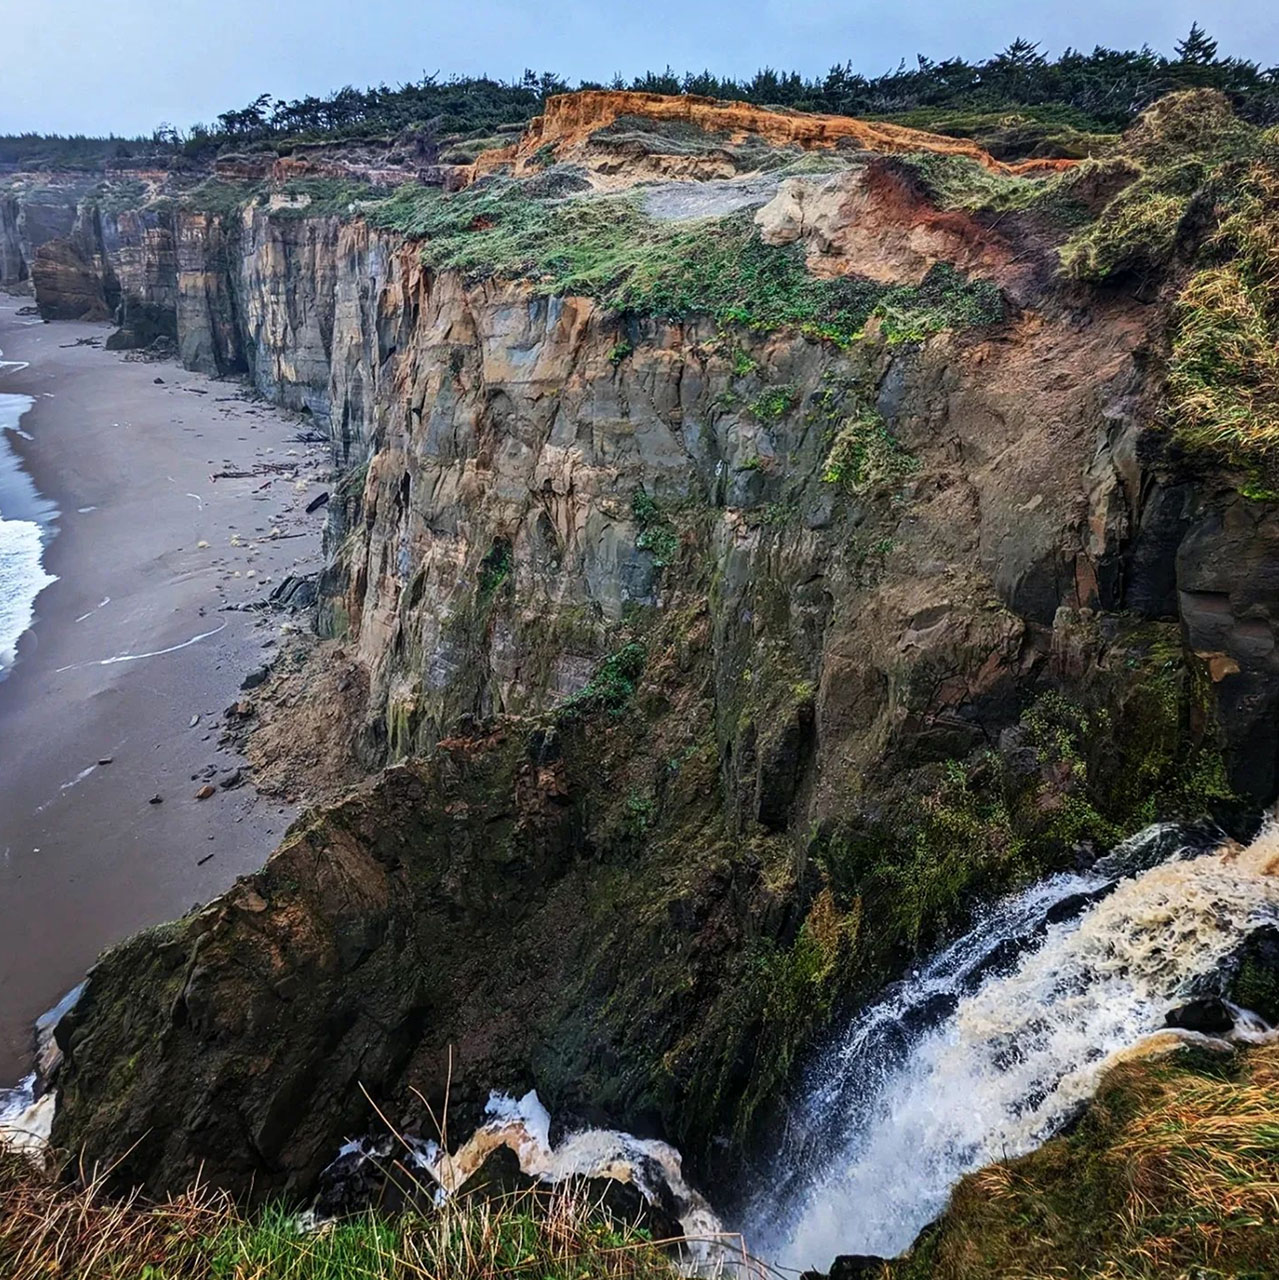 Waterfall at Blacklock Point Trail in Langlois, Oregon with a view of the ocean and sea cliffs.